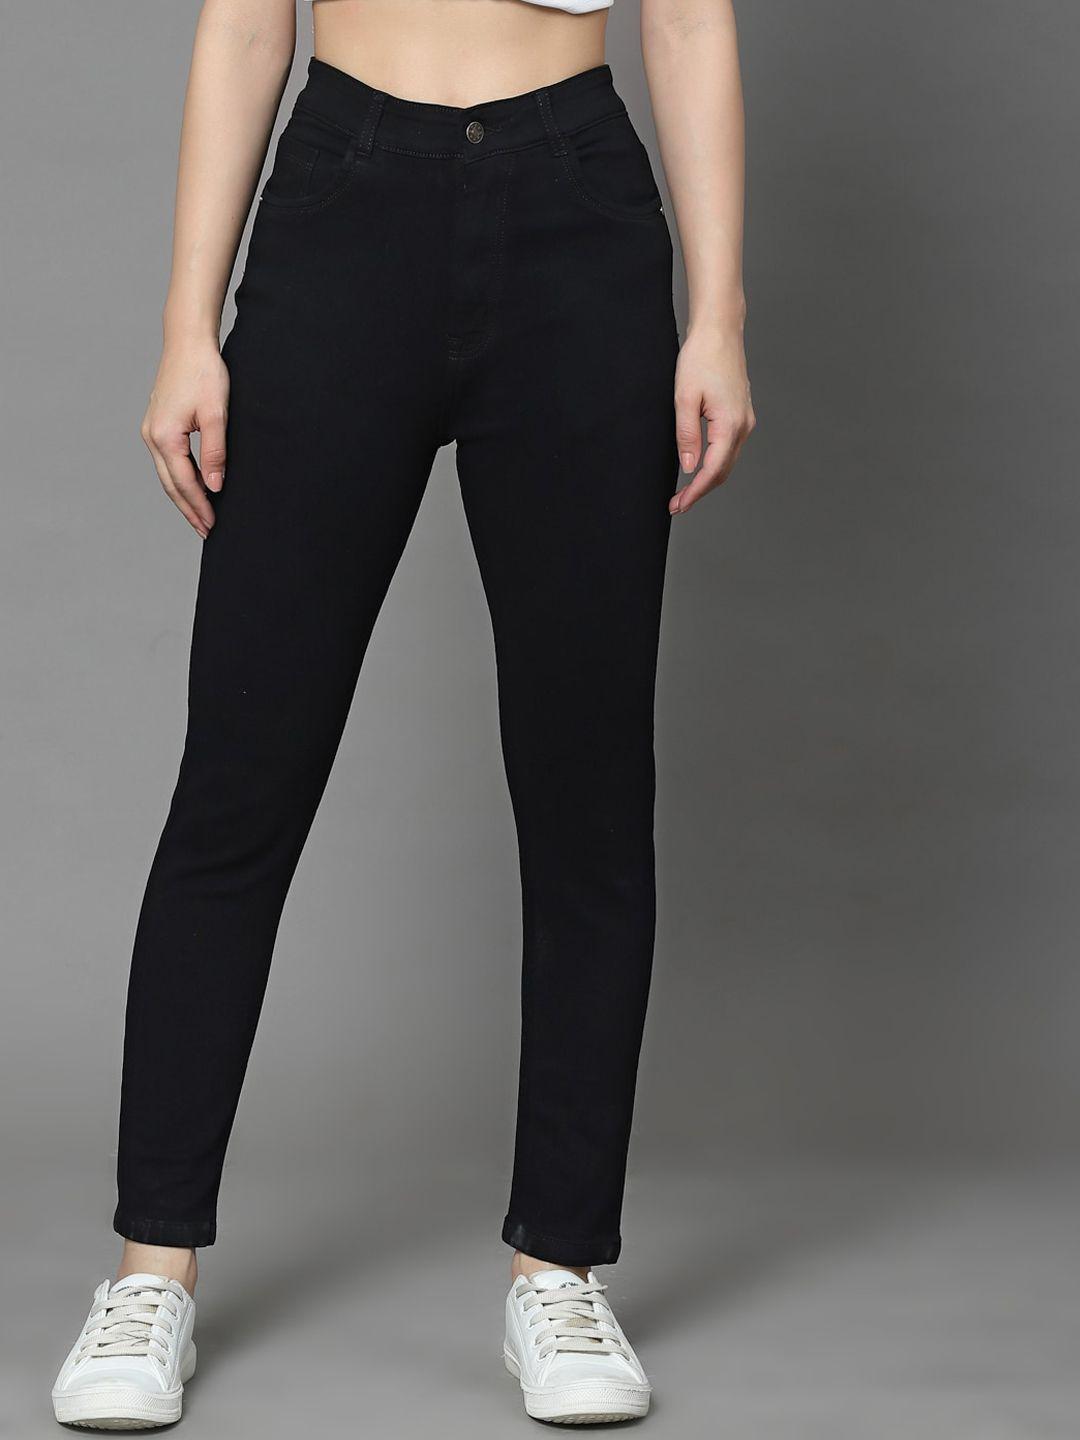 kassually-women-black-slim-fit-stretchable-jeans